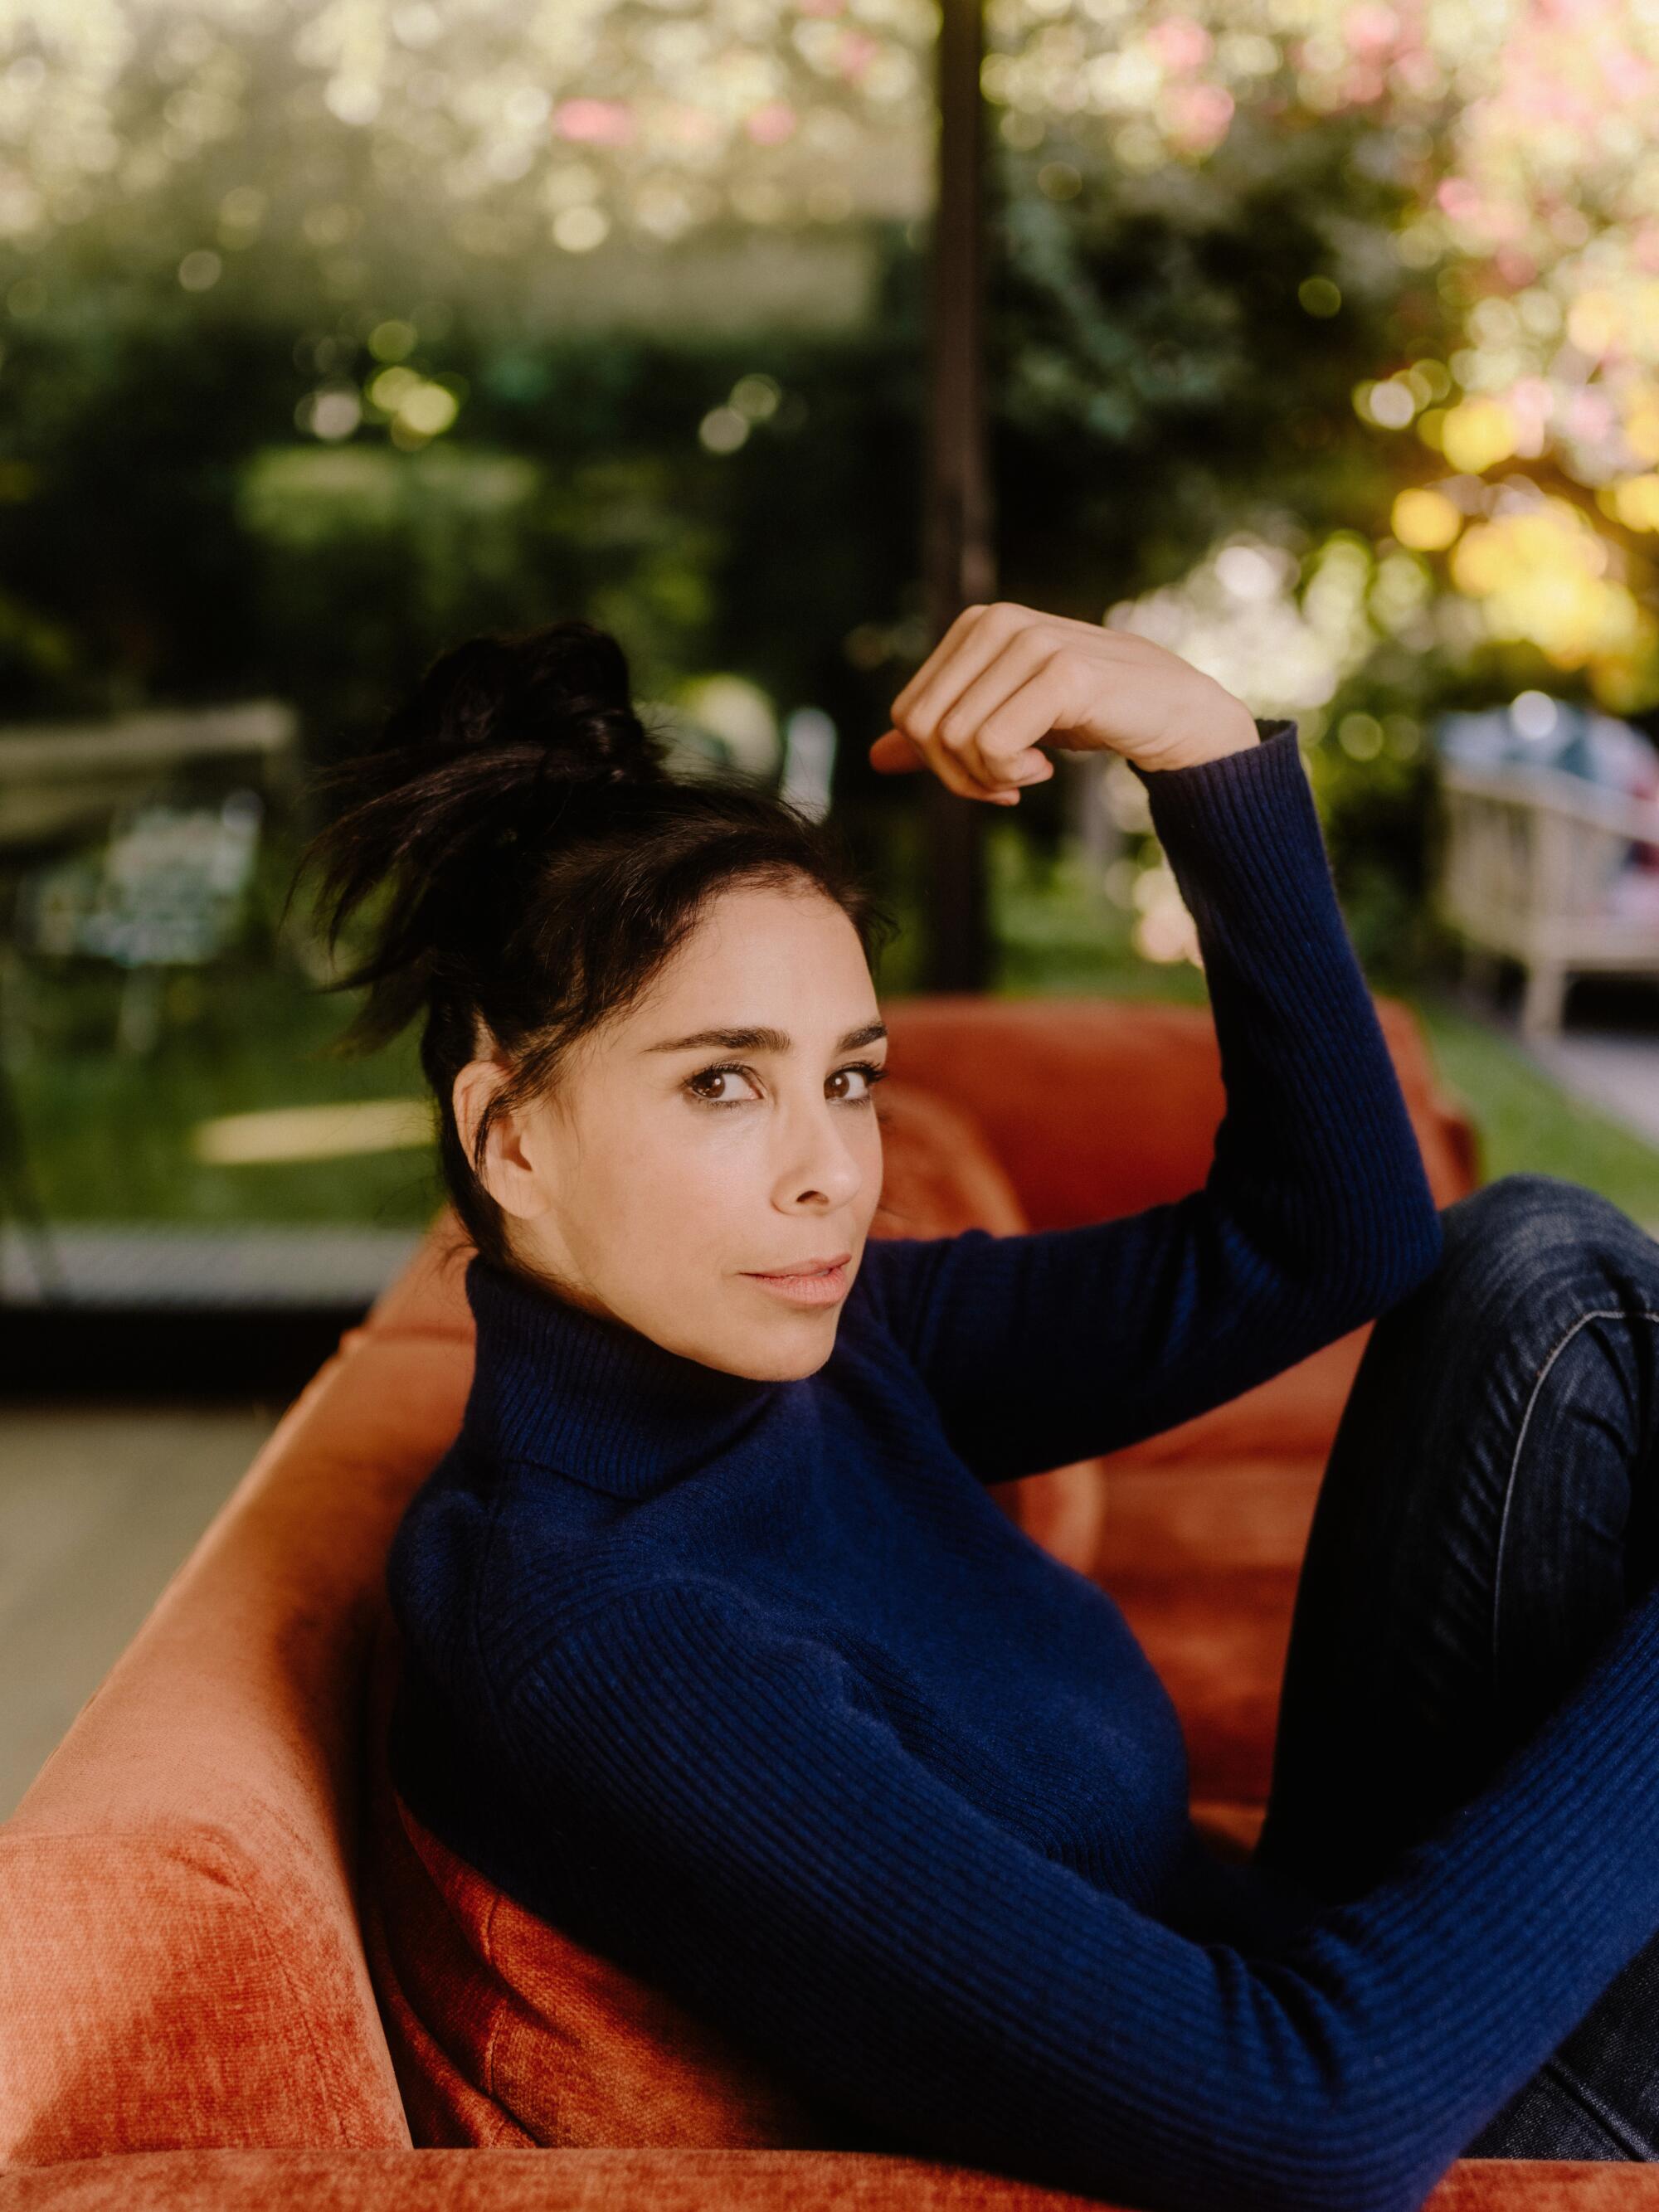 Sarah Silverman reclines on a couch